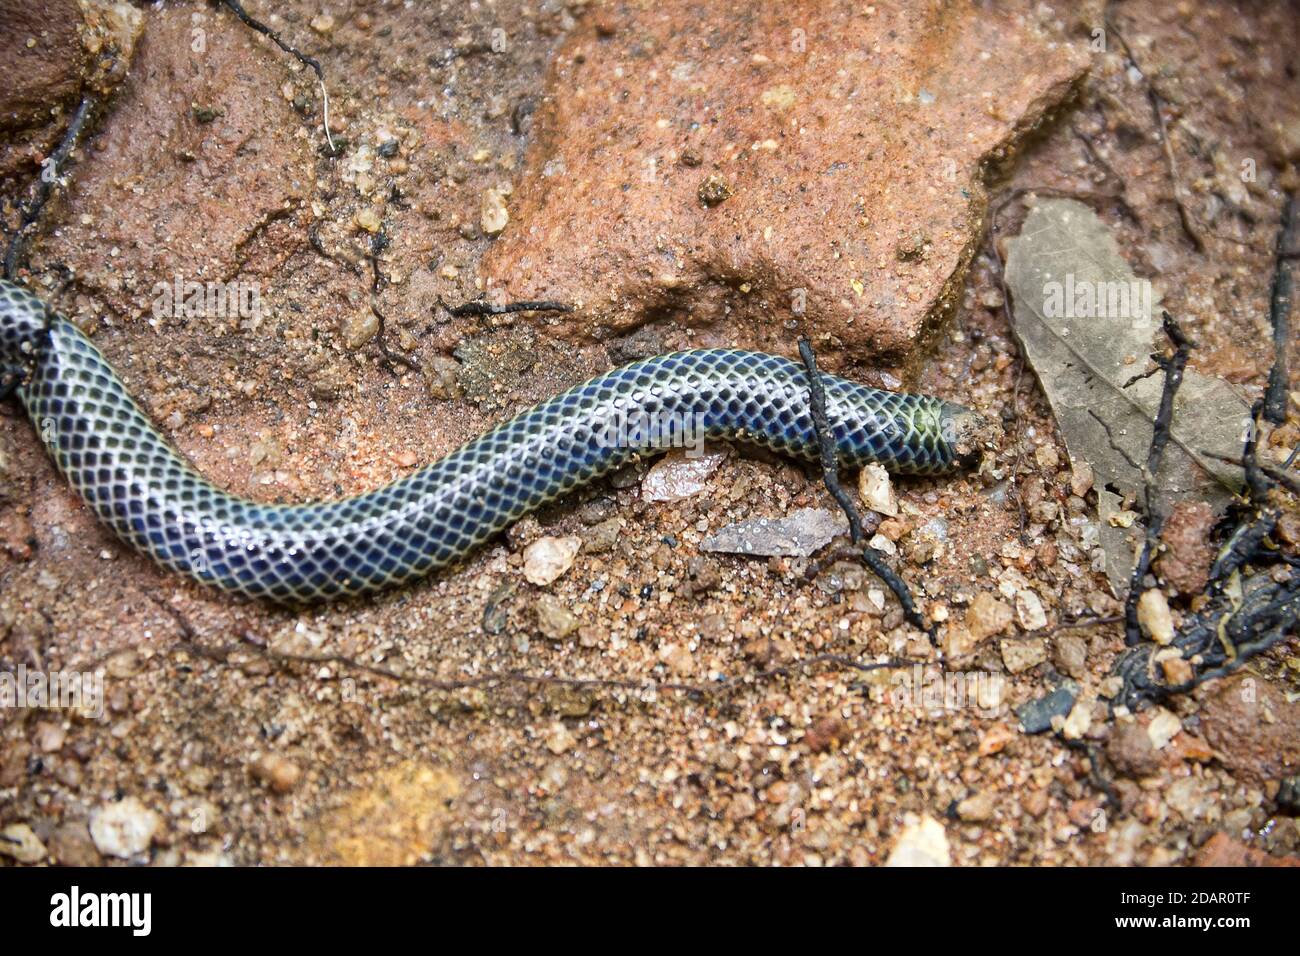 The snake swallows a large earthworm. Shield-tailed snakes (Uropeltidae) possibly genus Platyplectrurus. Tropical rain forest in Sri Lanka Stock Photo